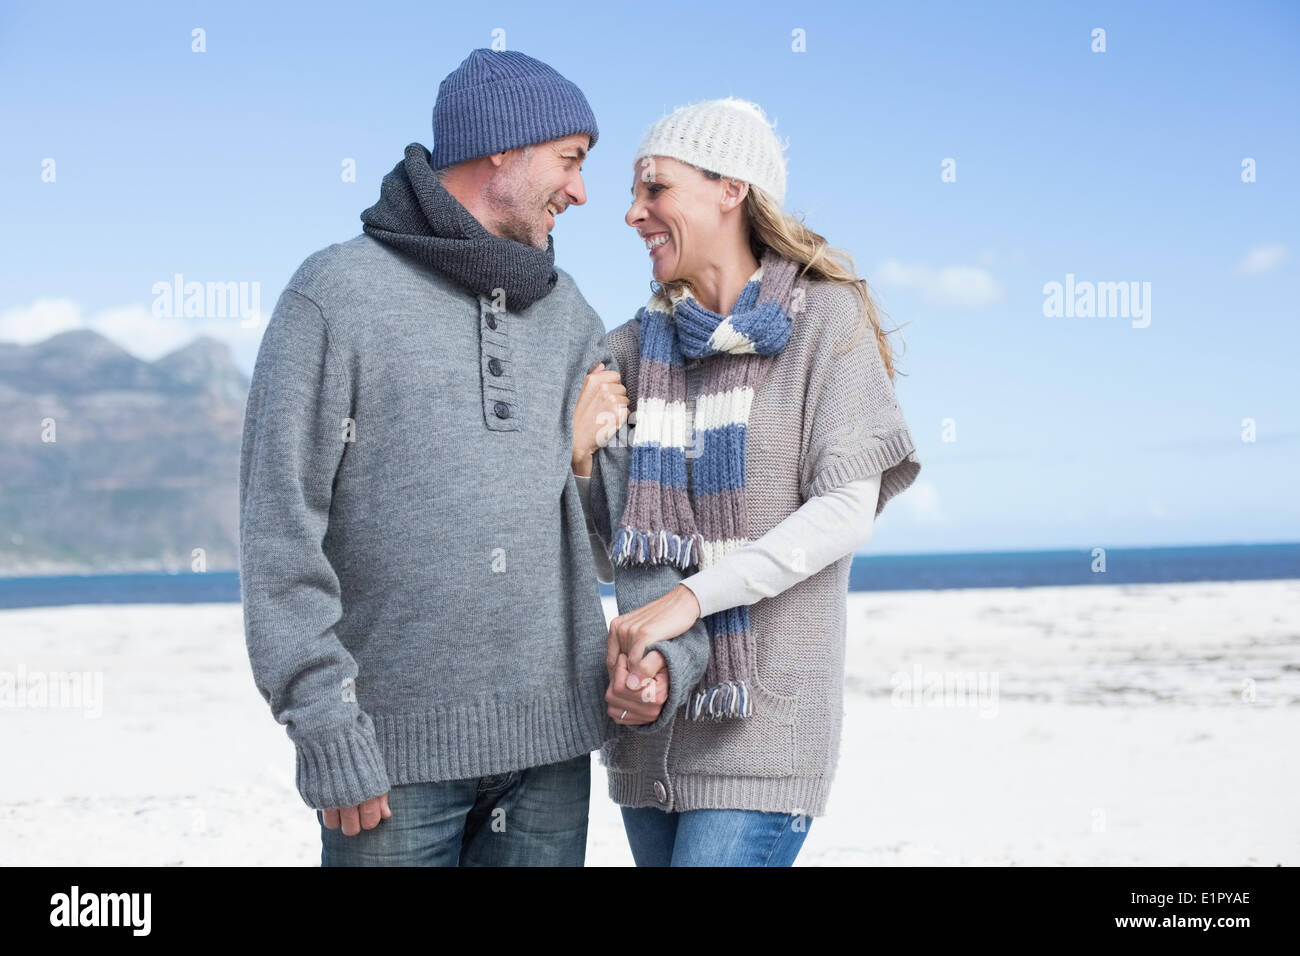 Smiling couple standing on the beach in warm clothing Stock Photo